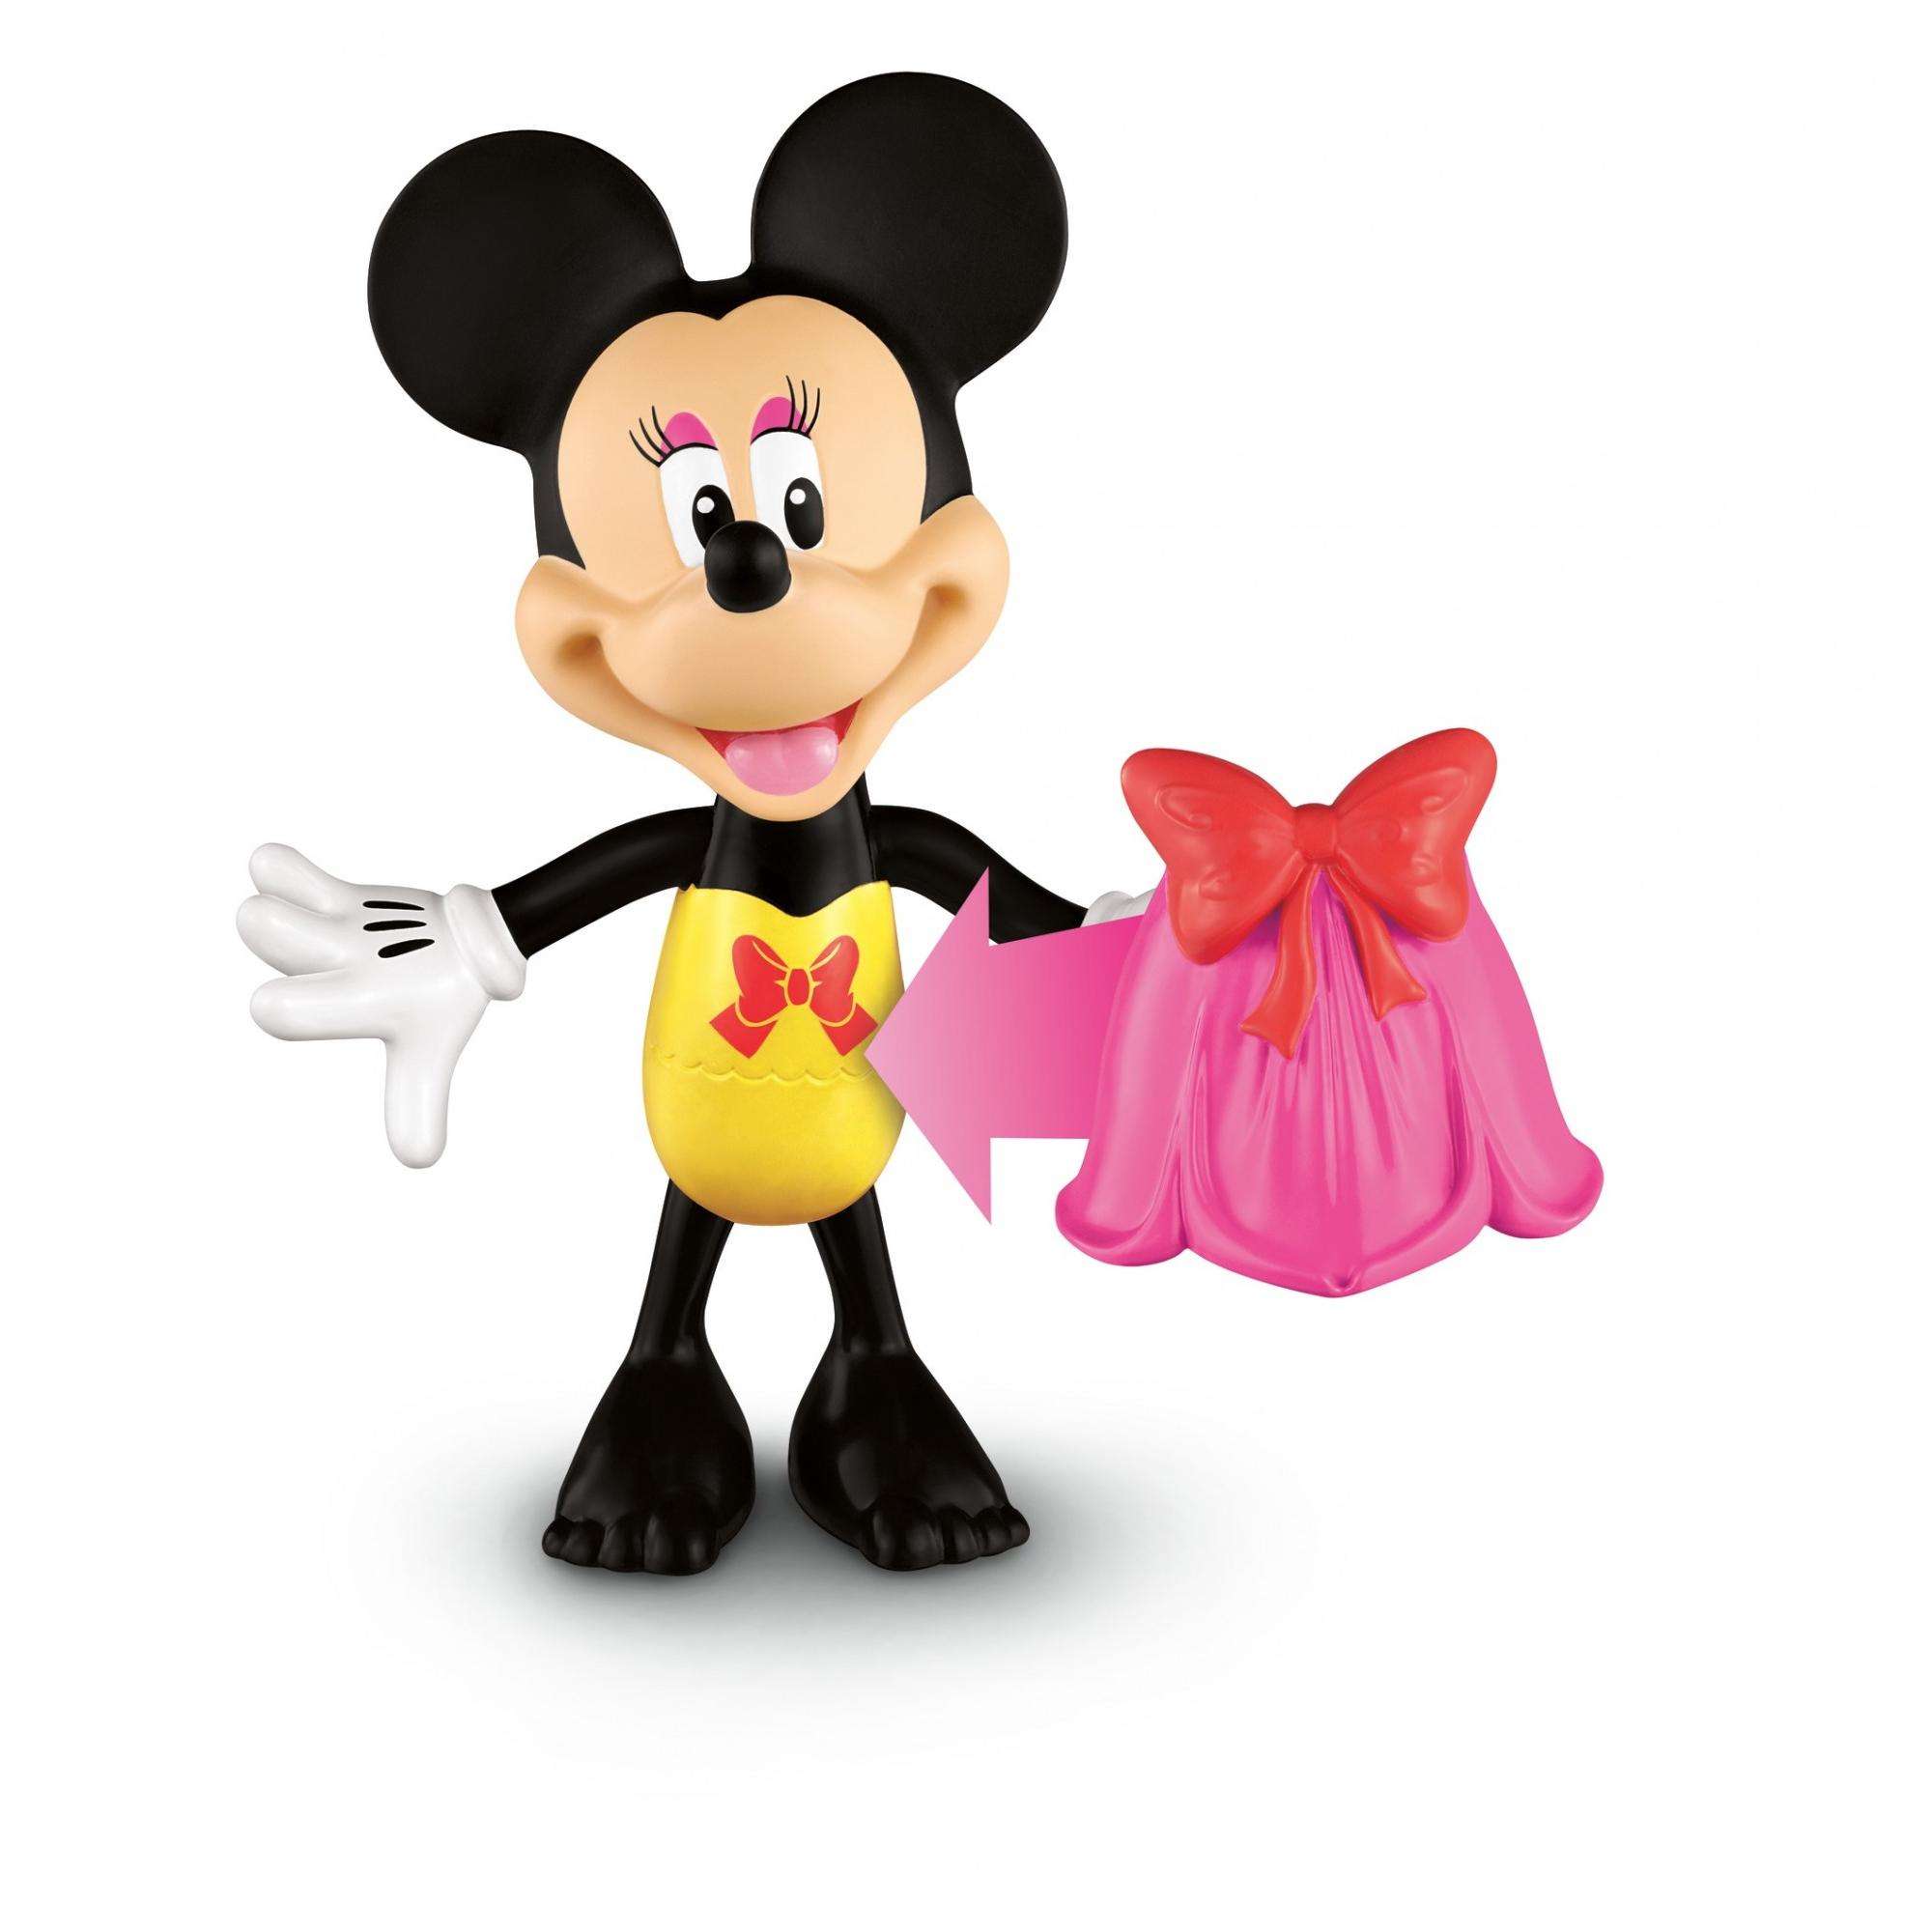 Fisher-Price Disney Minnie Mouse Flower Garden Bow-Tique Playset - image 3 of 4